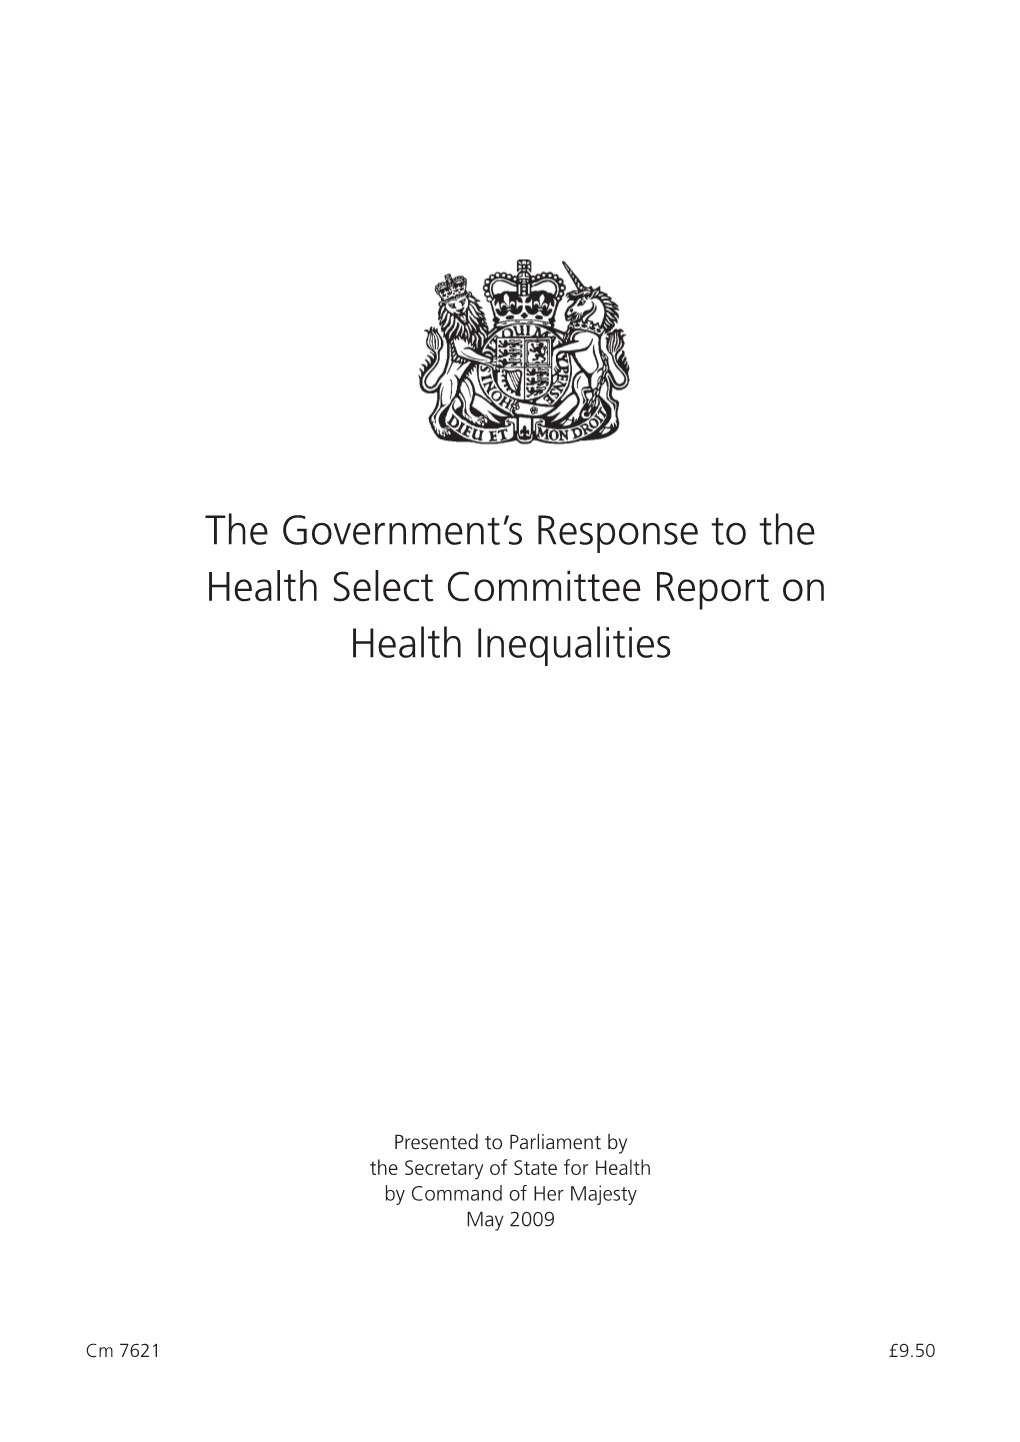 The Government's Response to the Health Select Committee Report On